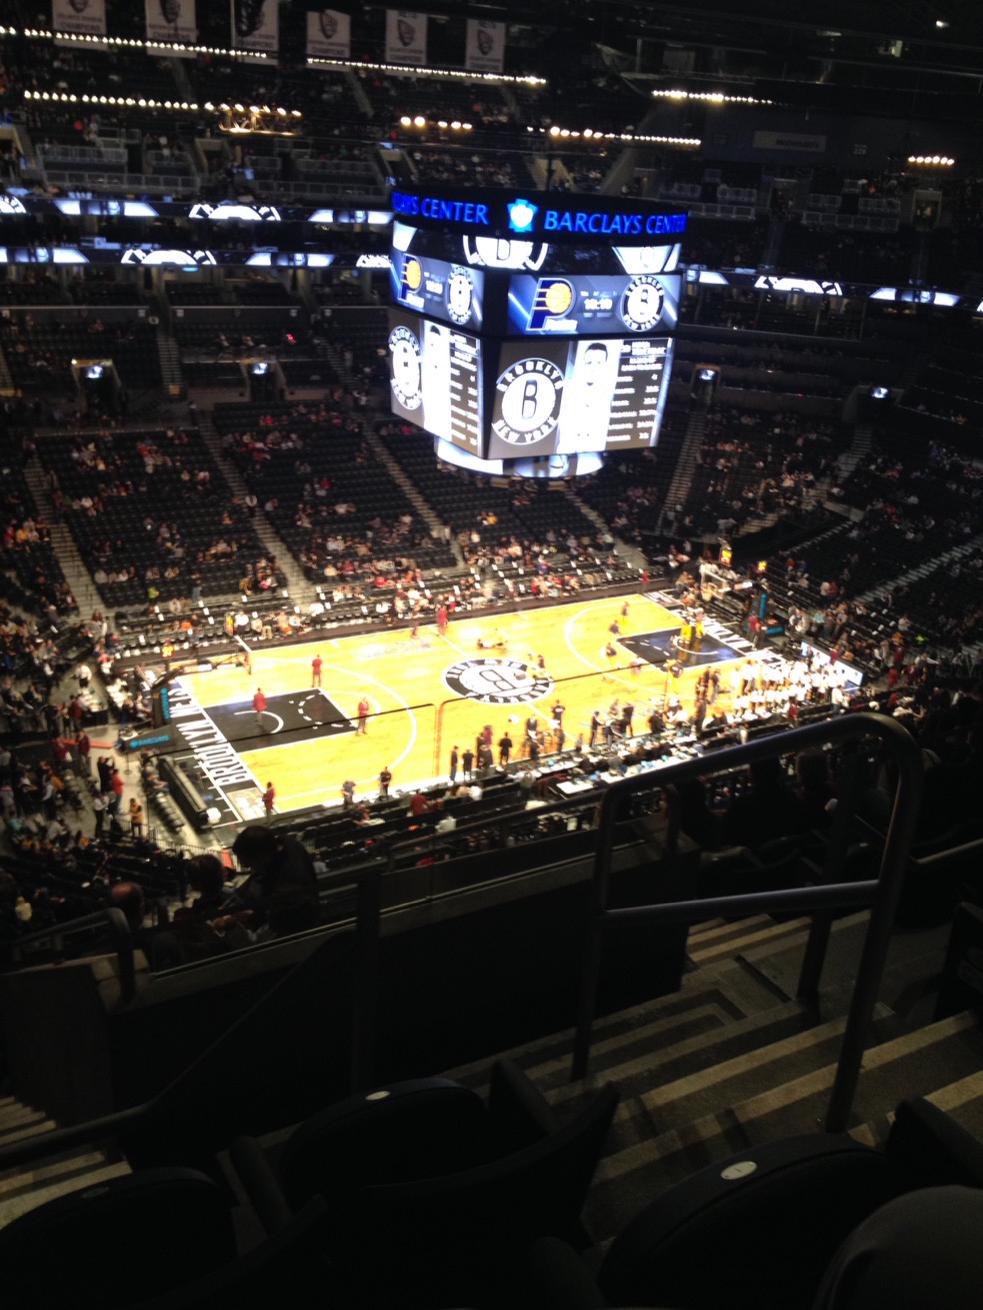 Seat view from Section 211 at the Barclays Center, home of the Brooklyn Nets